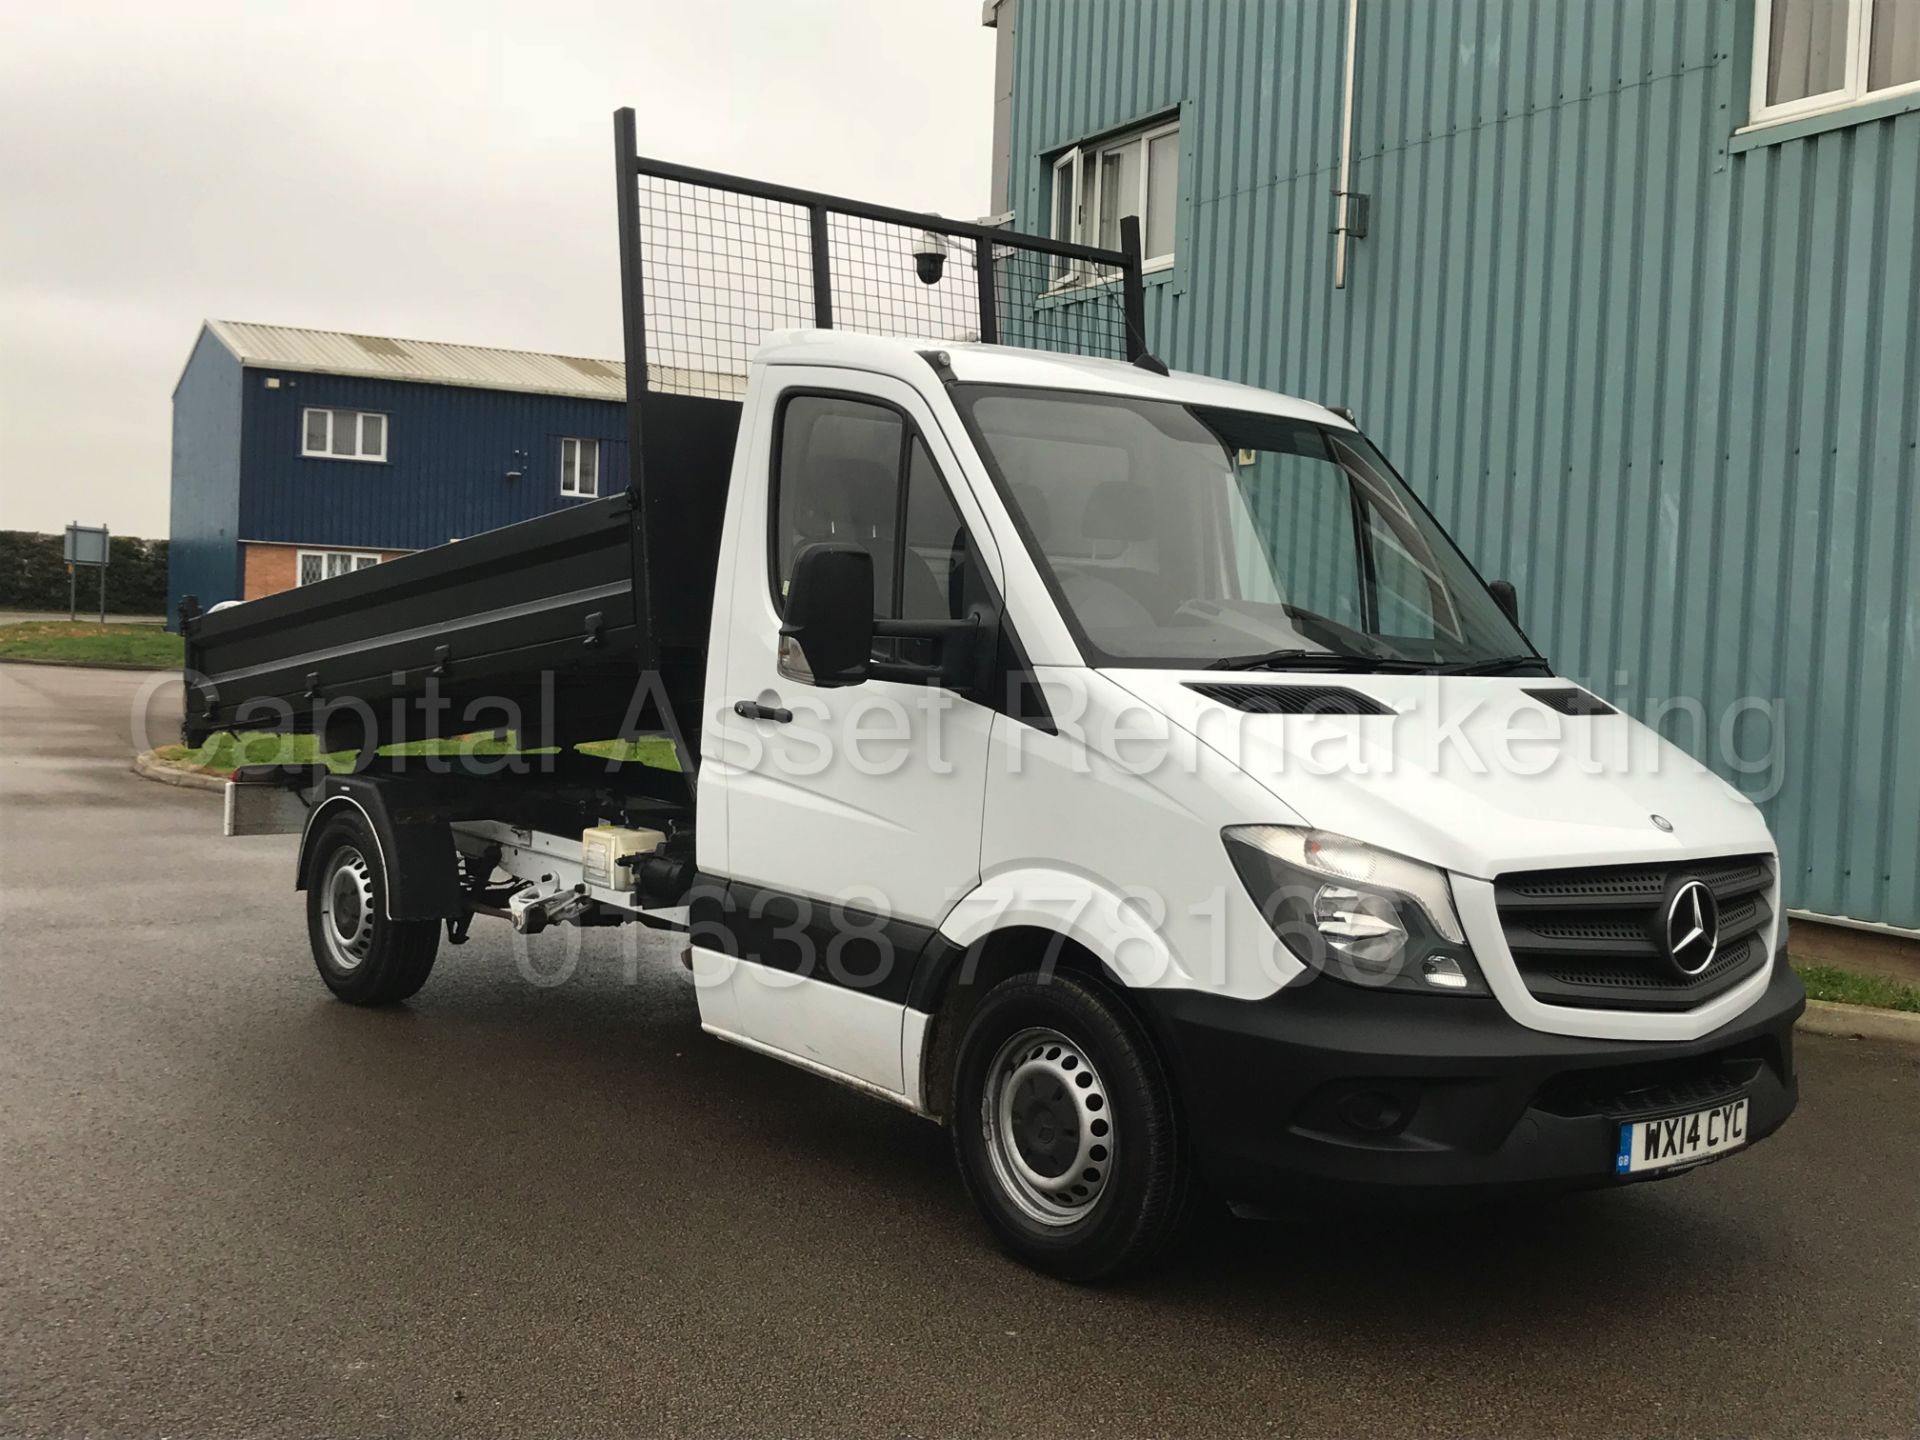 (ON SALE) MERCEDES-BENZ SPRINTER 313 CDI 'LWB - TIPPER' (2014 FACELIFT) '130 BHP -6 SPEED' *1 OWNER* - Image 9 of 24